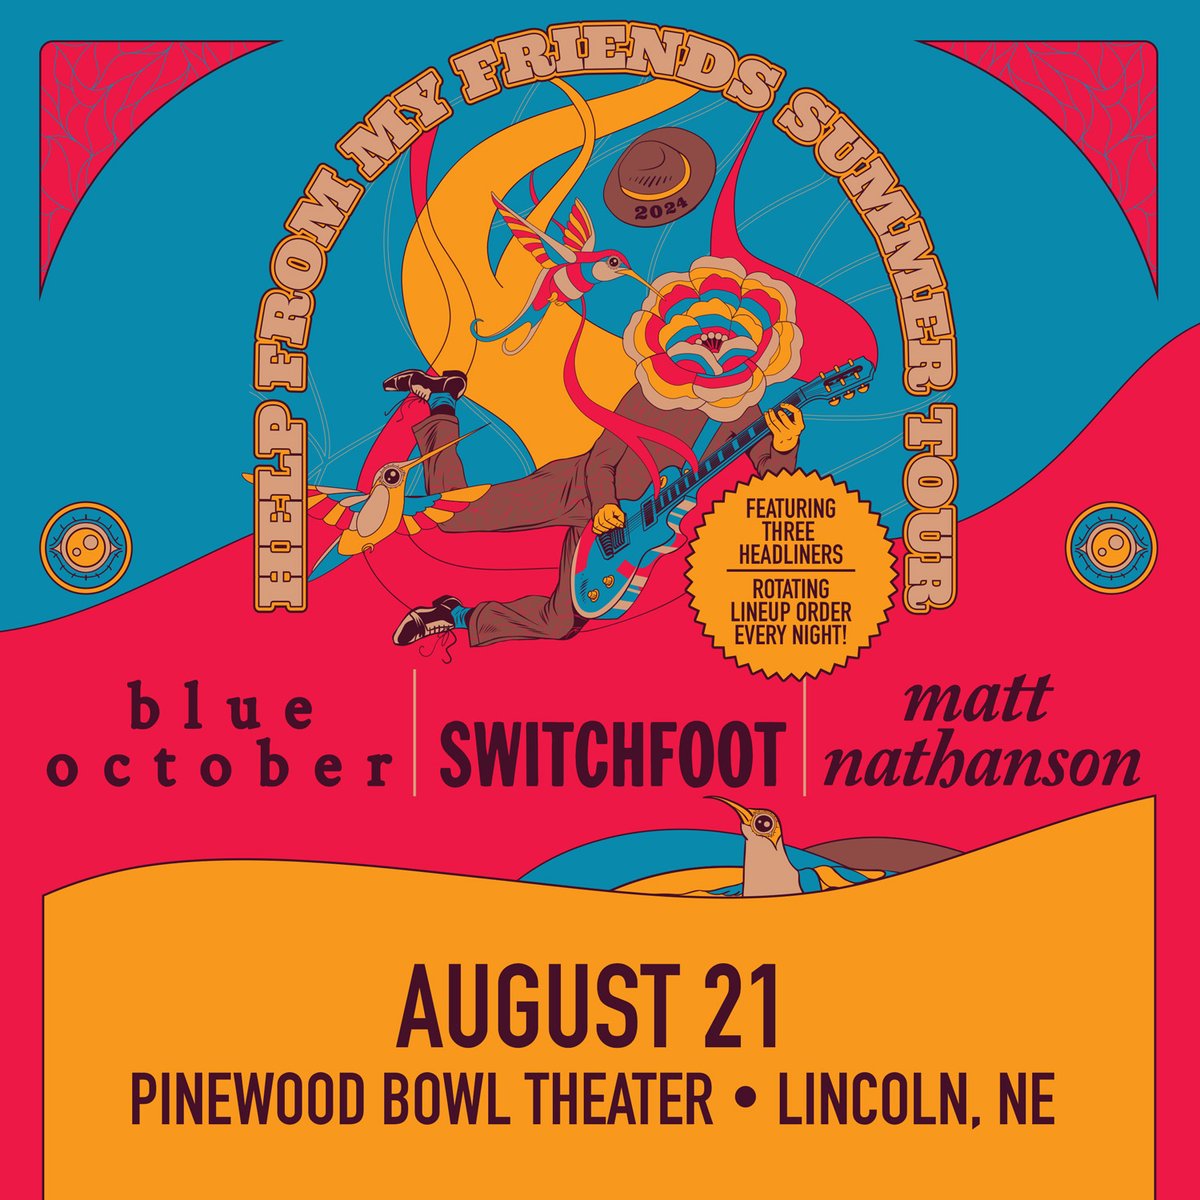 ON SALE NOW: @BlueOctober / @Switchfoot / @MattNathanson bring the Help From My Friends Summer Tour to Pinewood Bowl Theater August 21. Get your tickets here: bit.ly/hfmfpwbtix Please note: Mobile ticket delivery only. At this time, the Pinnacle Bank Arena ticket office is…